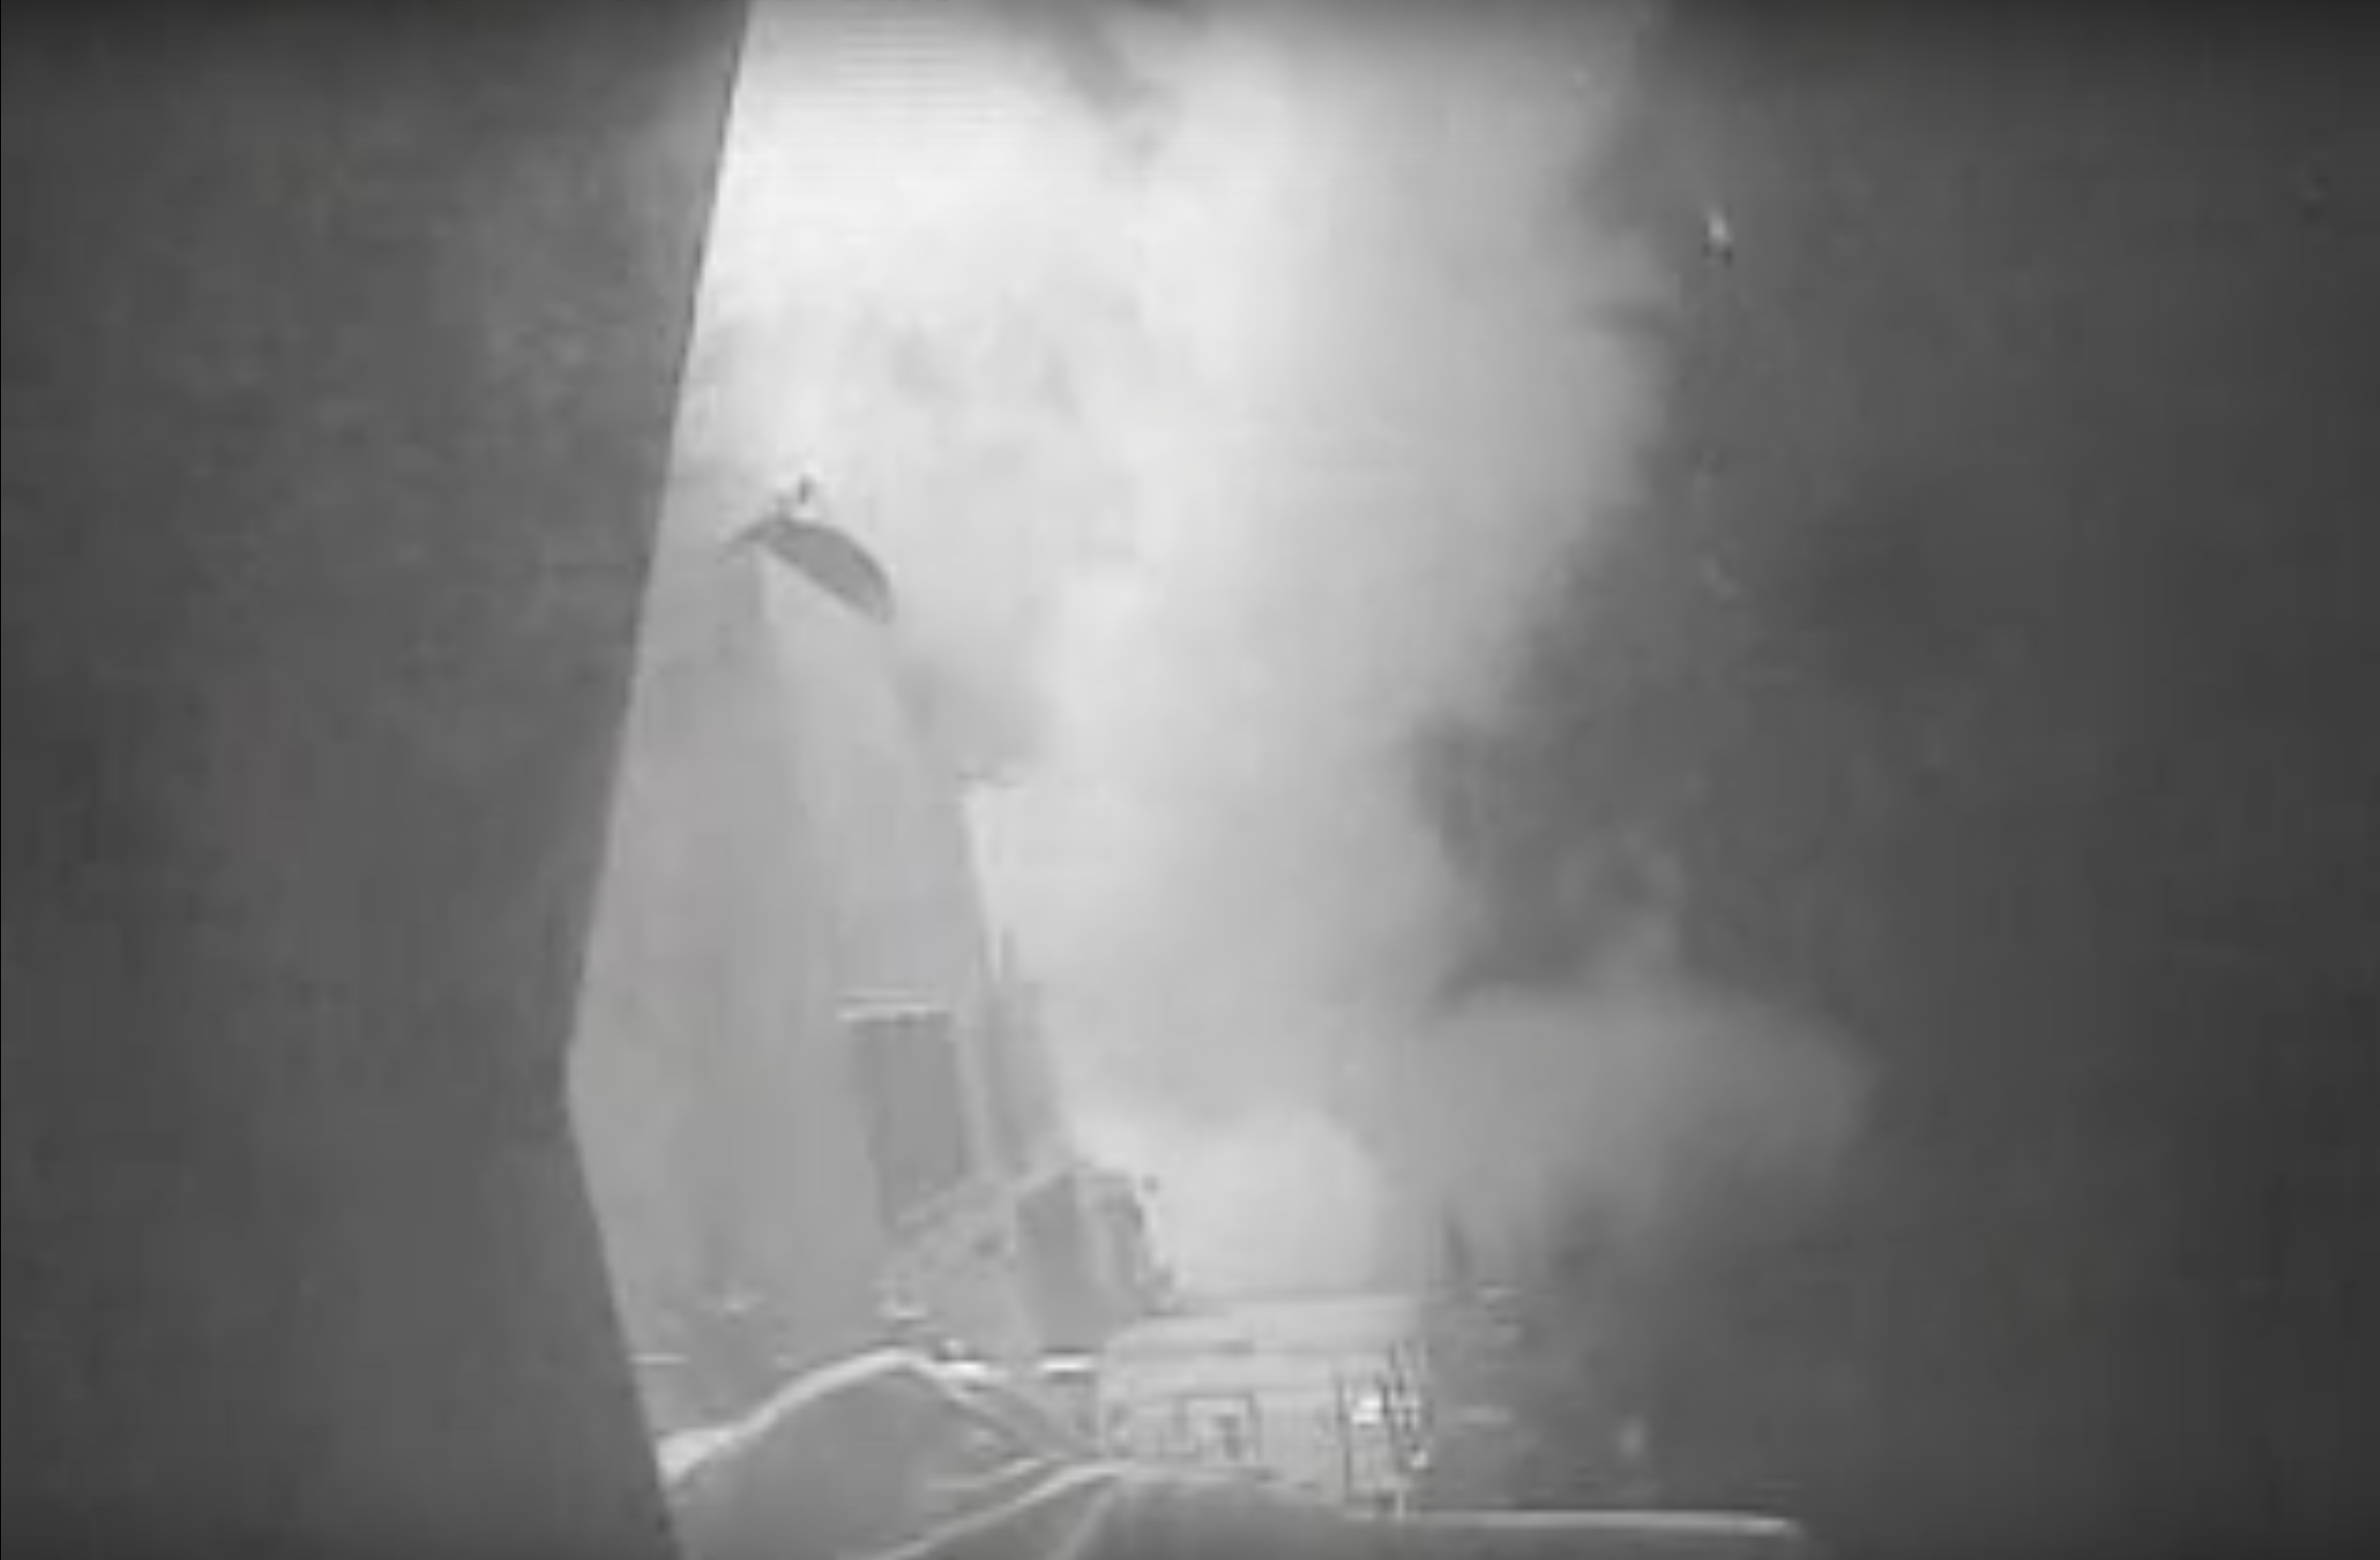 The destroyer USS Nitze launches a Tomahawk cruise missile against a radar site in Yemen. (U.S. Navy)